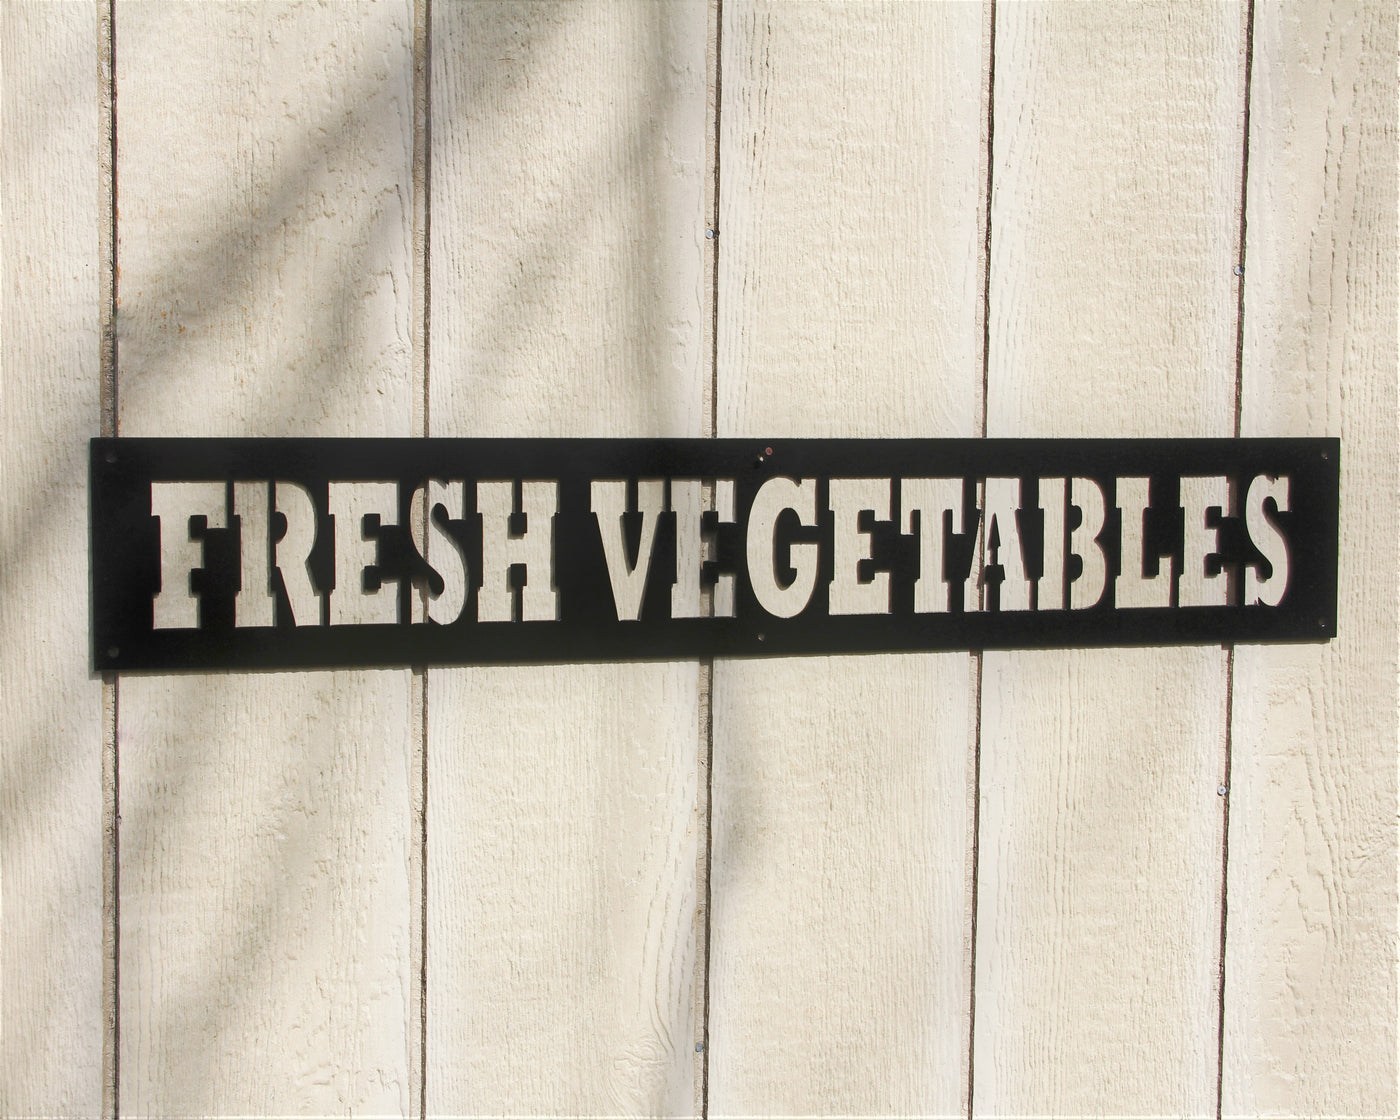 Fresh Vegetables Metal Word Sign - Madison Iron and Wood - Metal Art - metal outdoor decor - Steel deocrations - american made products - veteran owned business products - fencing decorations - fencing supplies - custom wall decorations - personalized wall signs - steel - decorative post caps - steel post caps - metal post caps - brackets - structural brackets - home improvement - easter - easter decorations - easter gift - easter yard decor